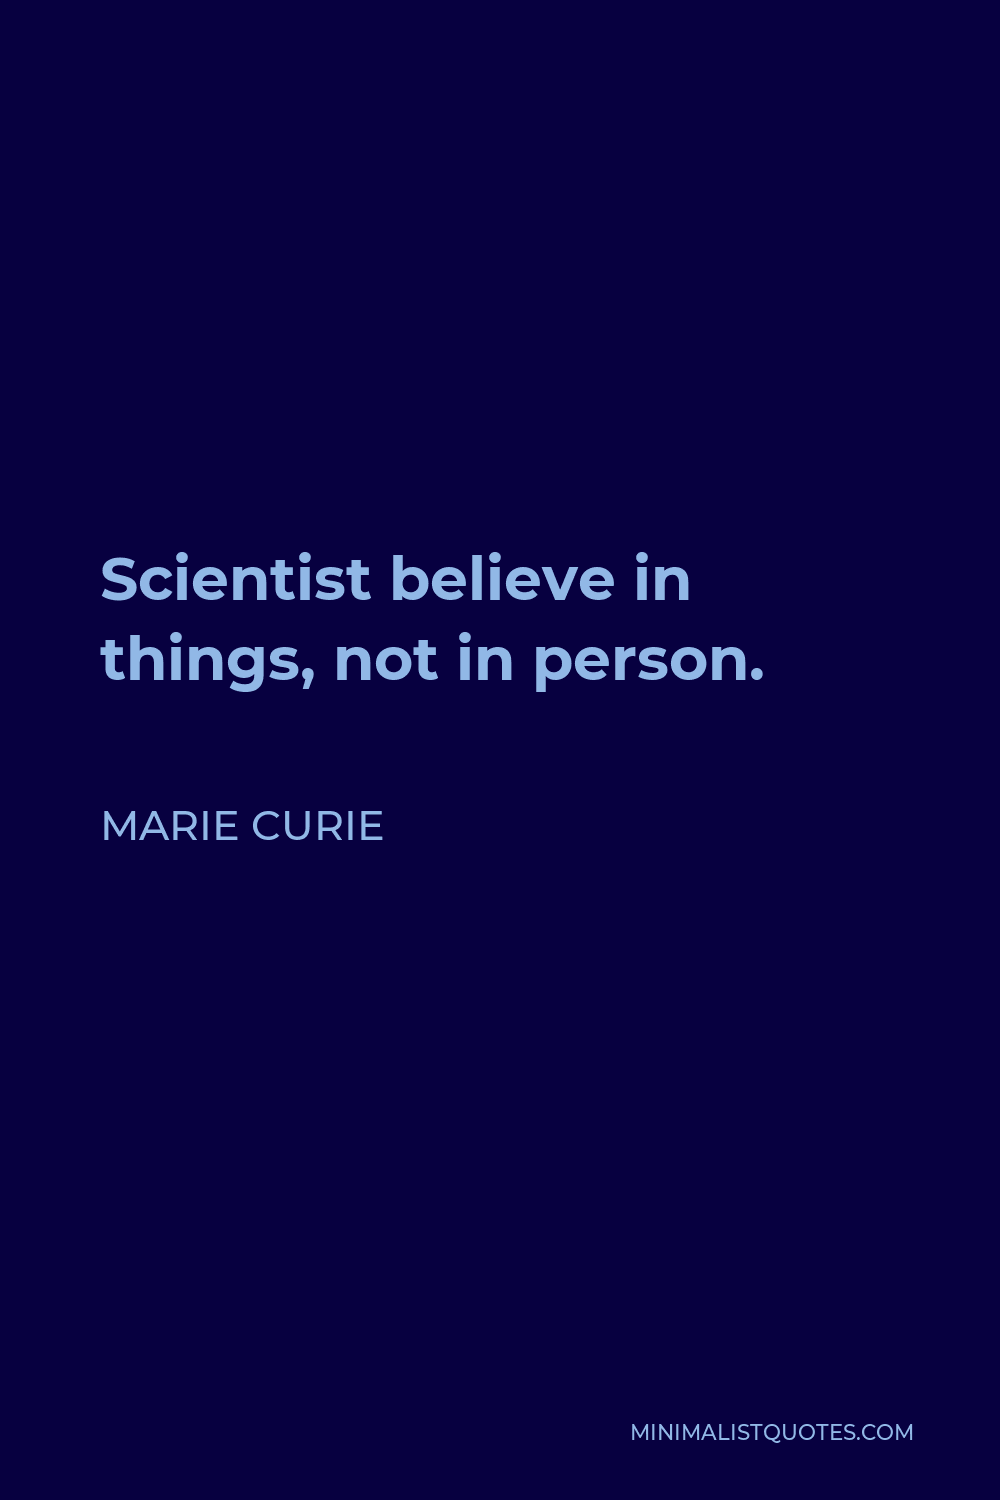 Marie Curie Quote - Scientist believe in things, not in person.